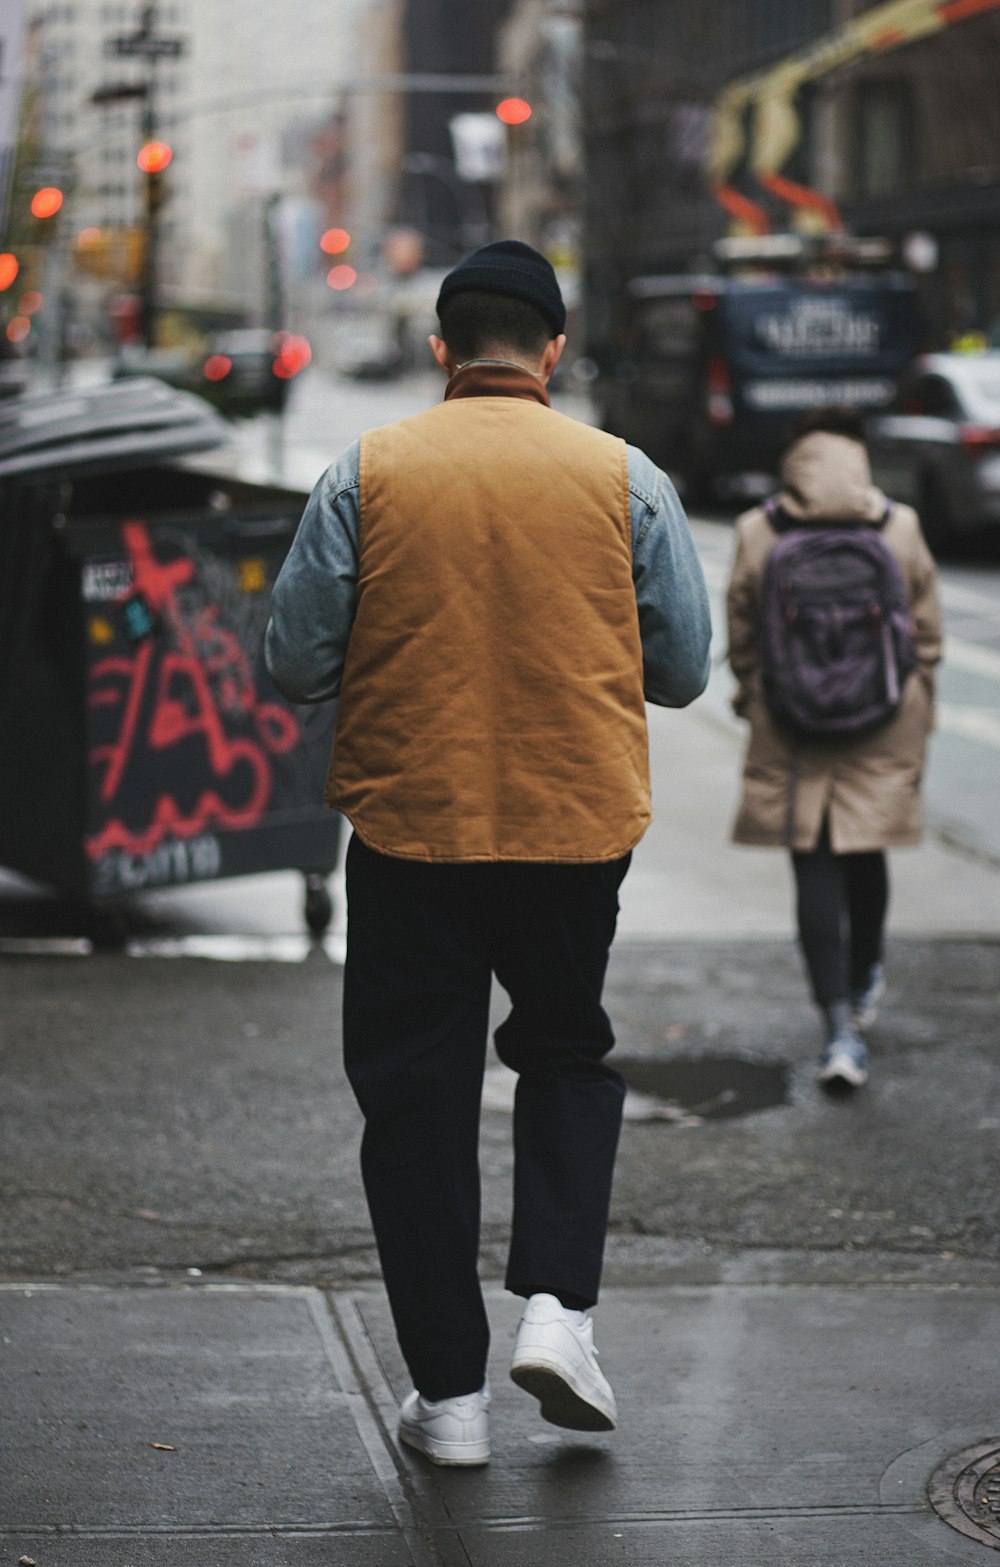 a man walking down a street with a backpack